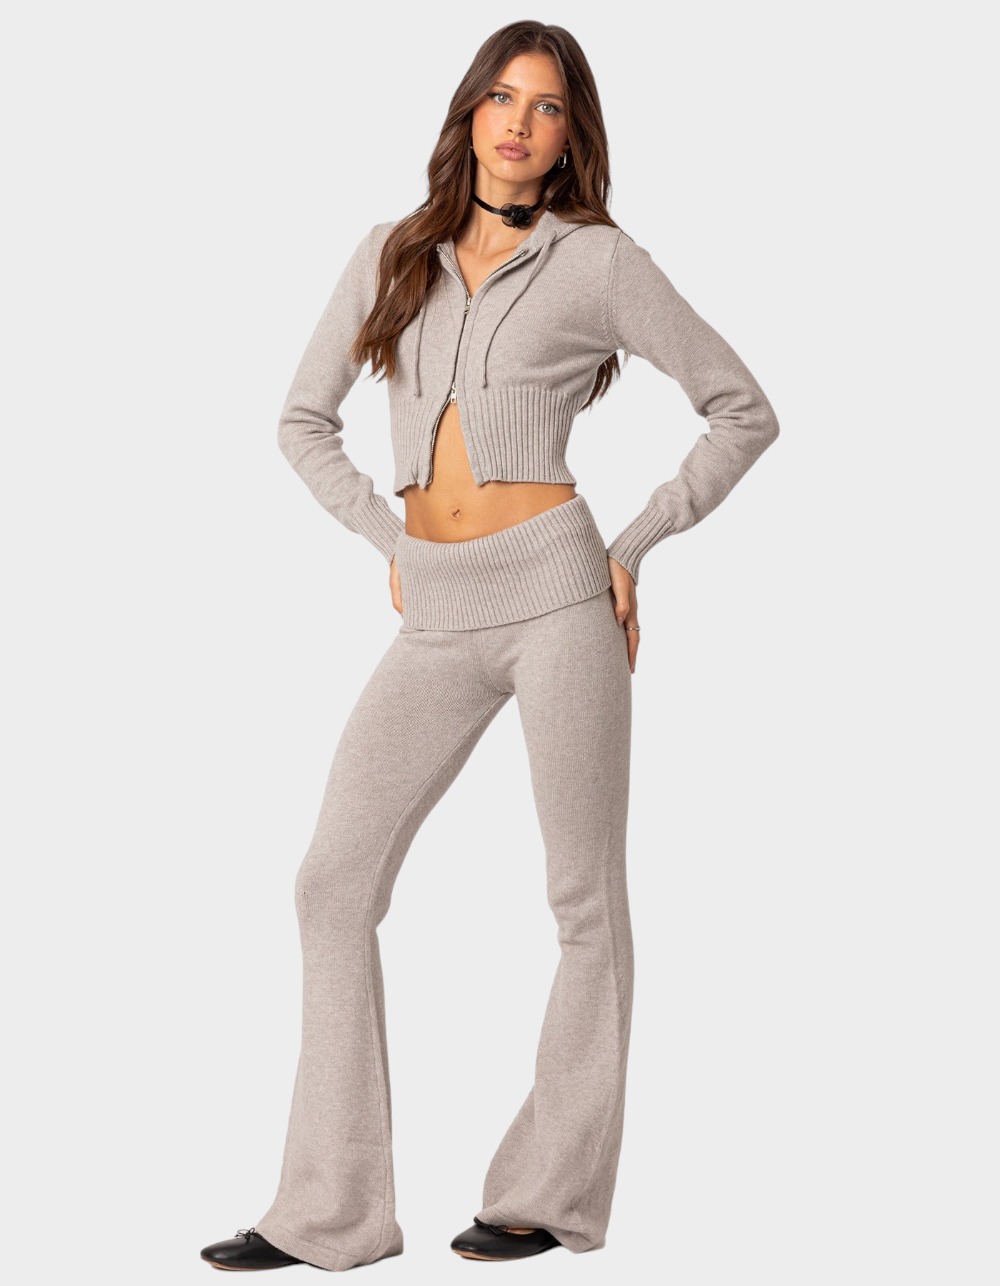 EDIKTED Desiree Knitted Low Rise Fold Over Pants - GRAY